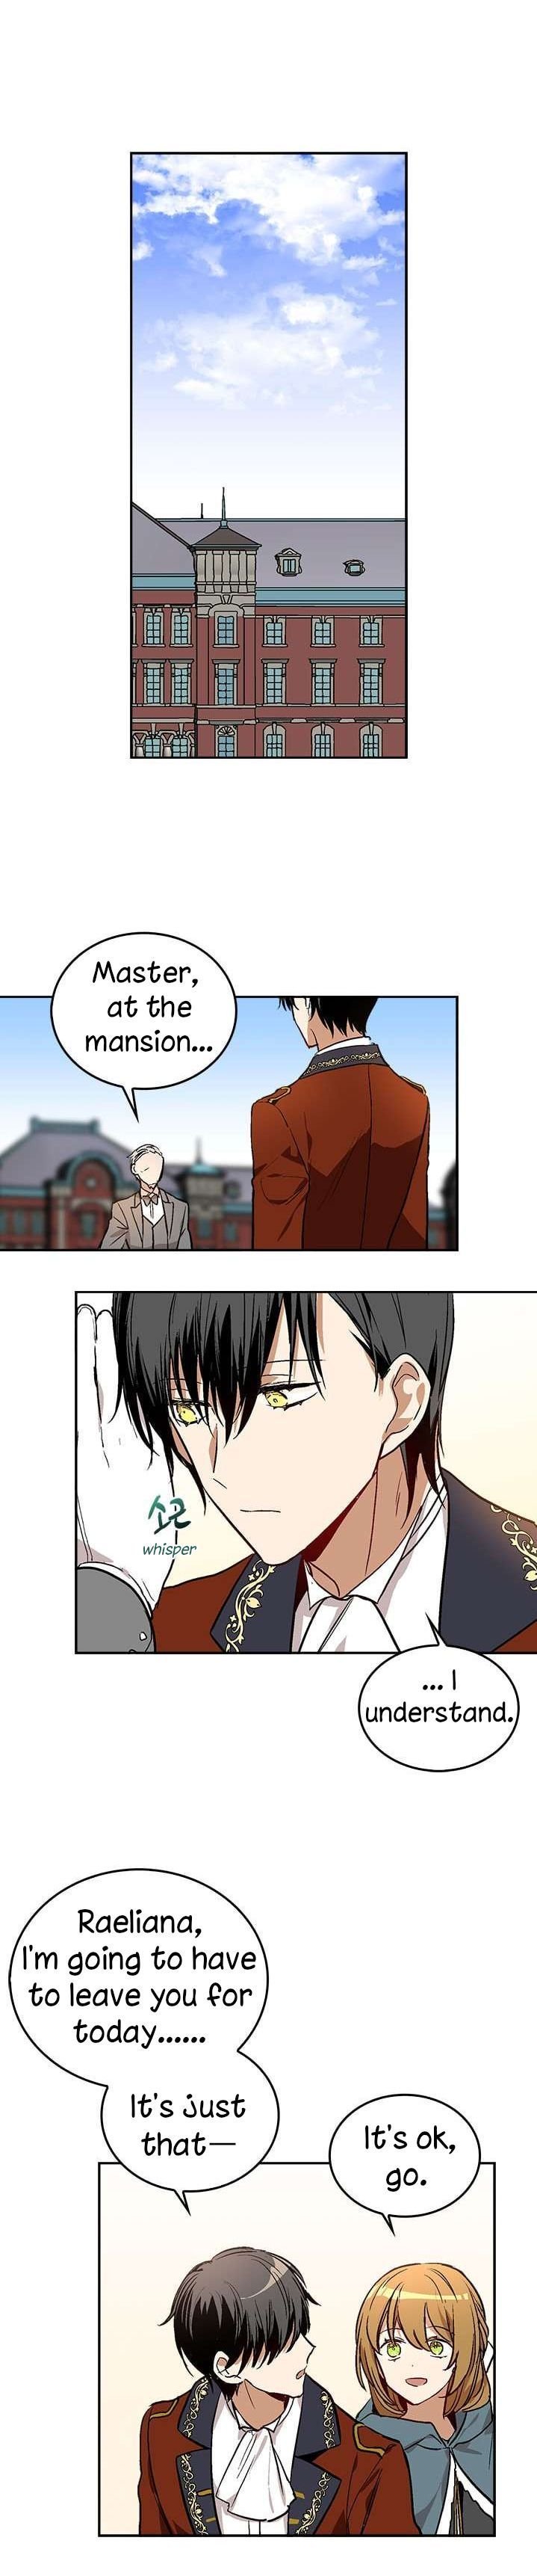 The Reason Why Raeliana Ended up at the Duke’s Mansion Chapter 45 - Page 2